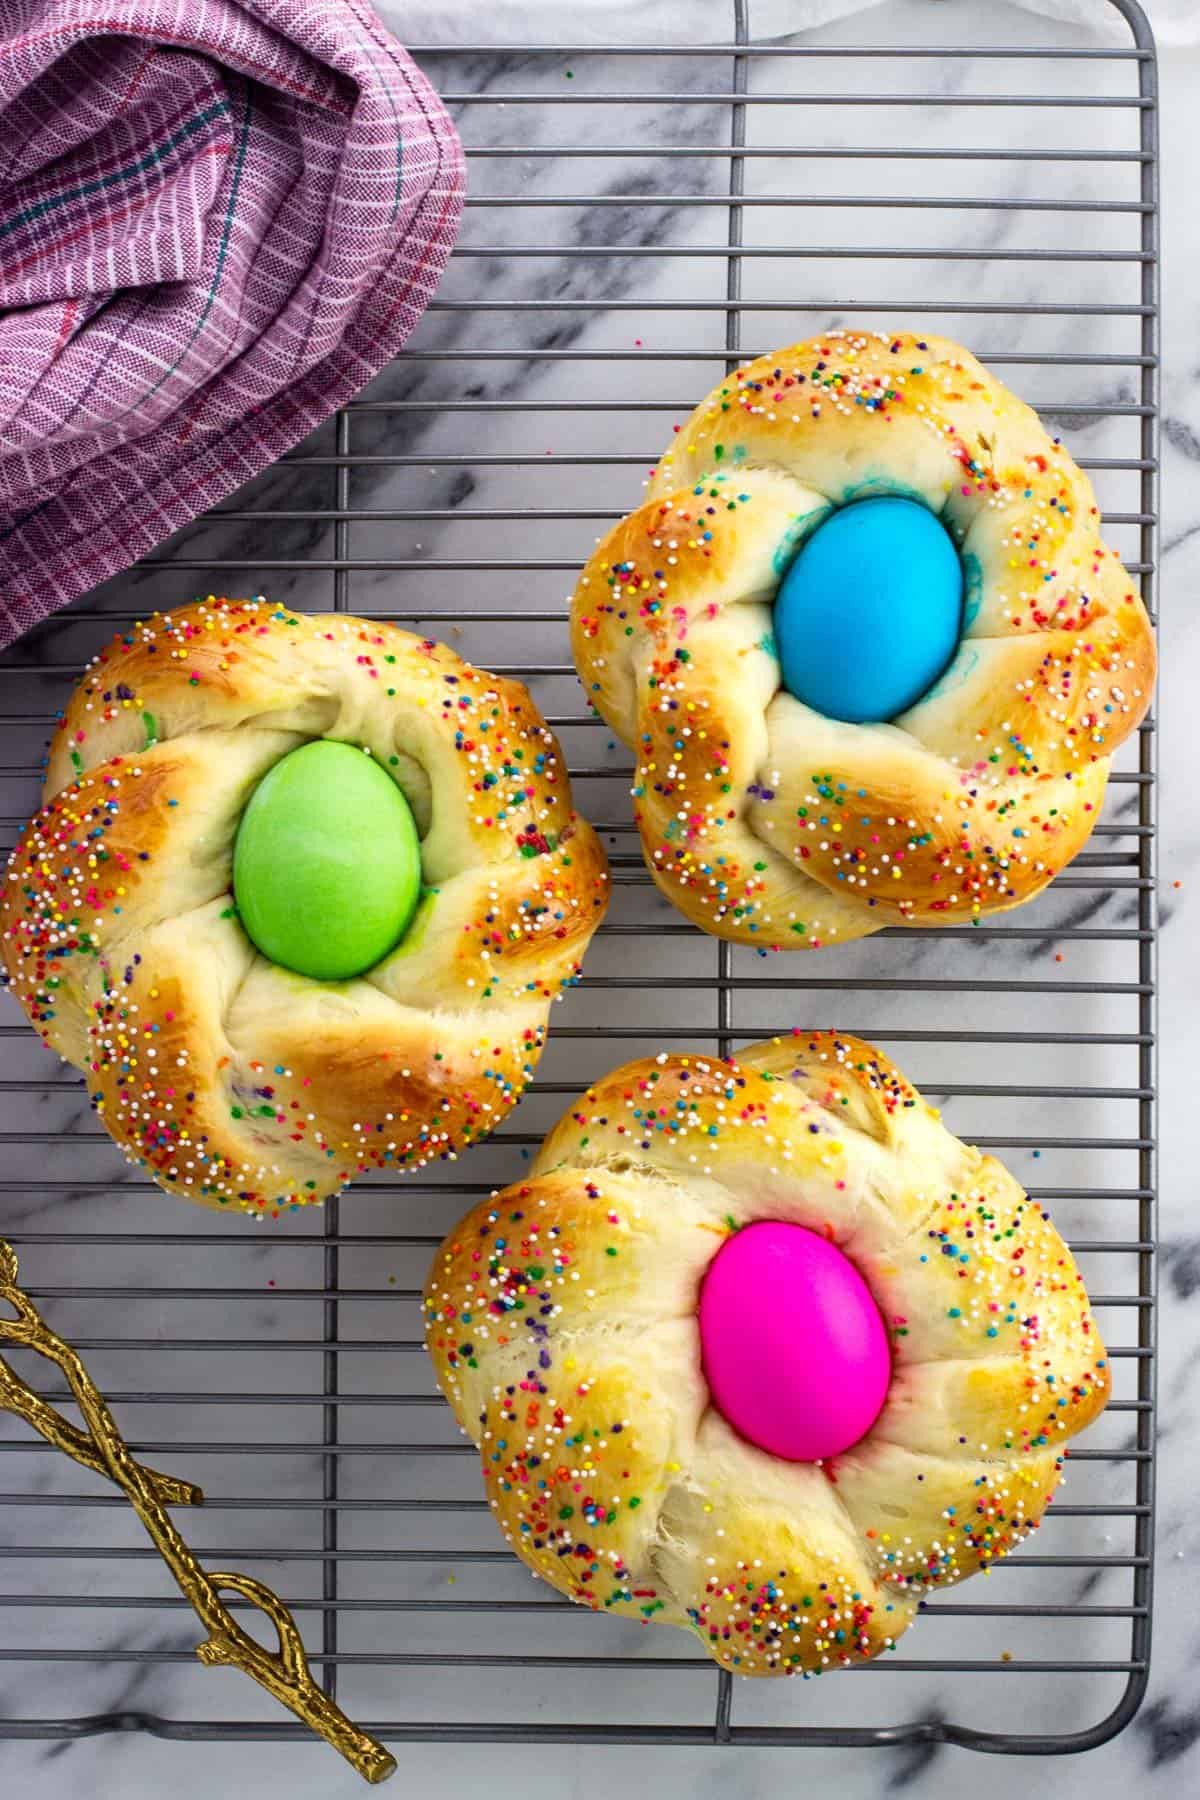 Three Italian Easter bread loaves on a wire rack.